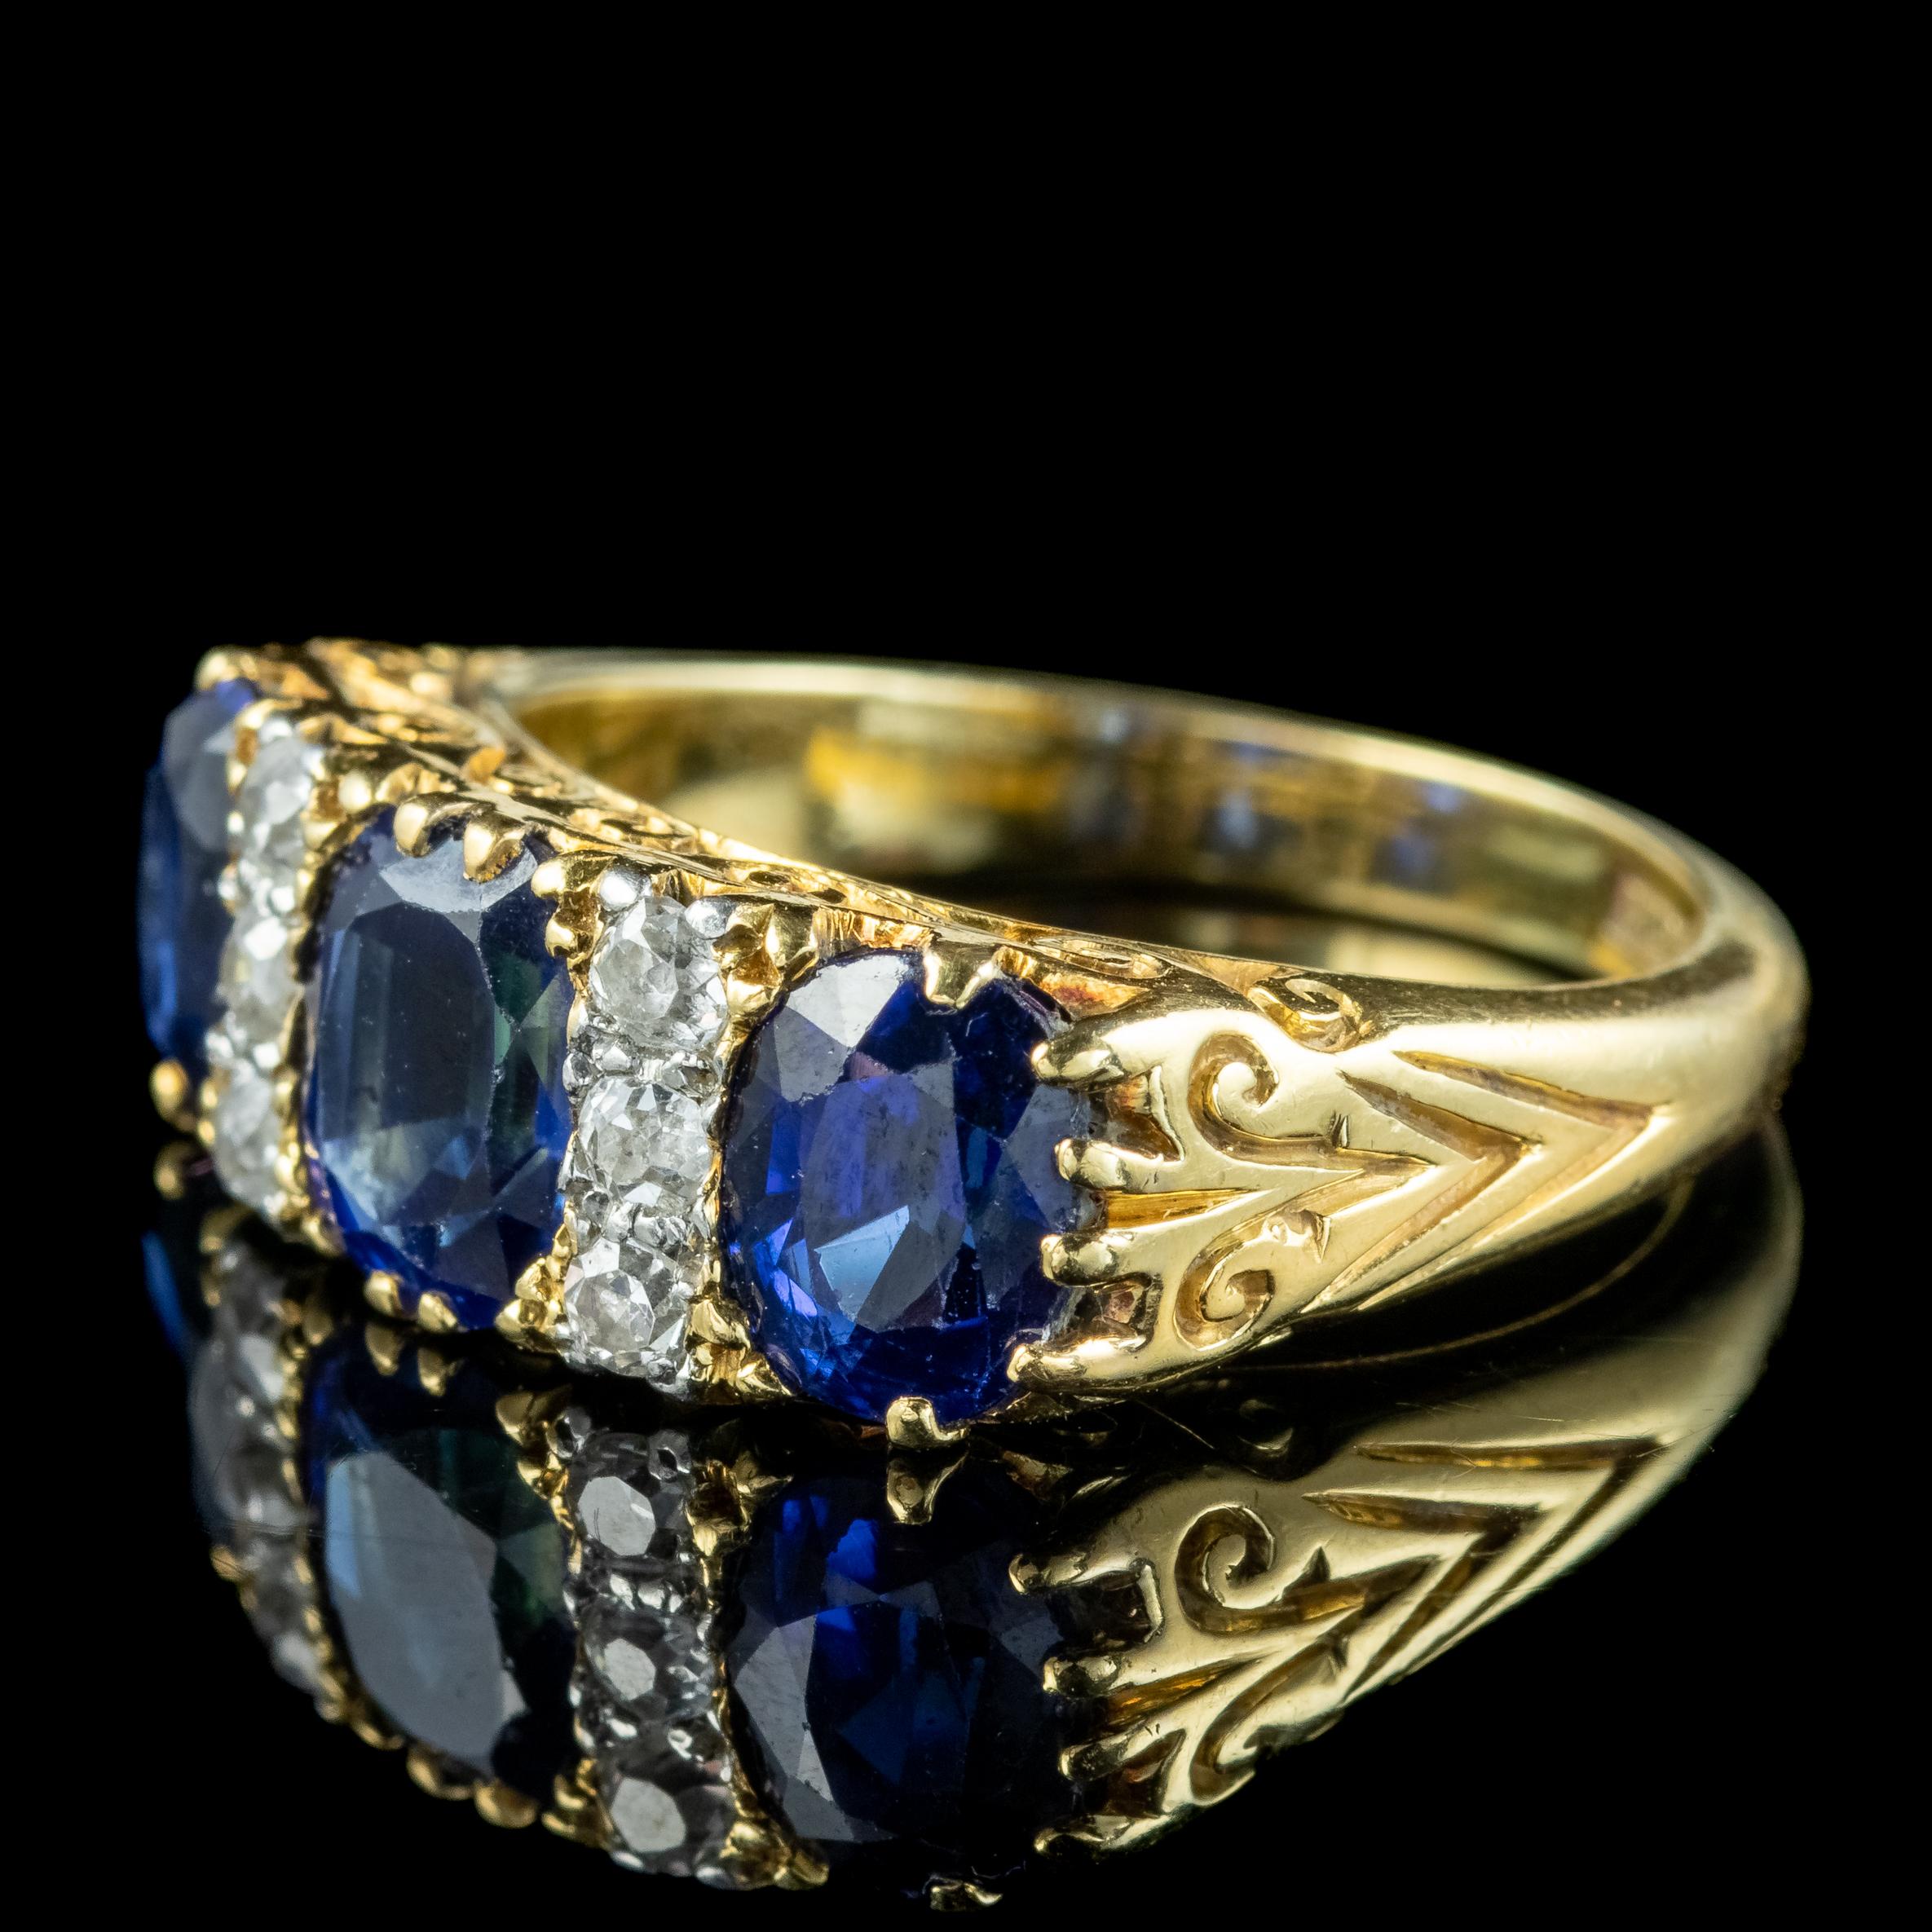 Women's Antique Edwardian Sapphire Diamond Ring 2.7ct Sapphire With Cert For Sale